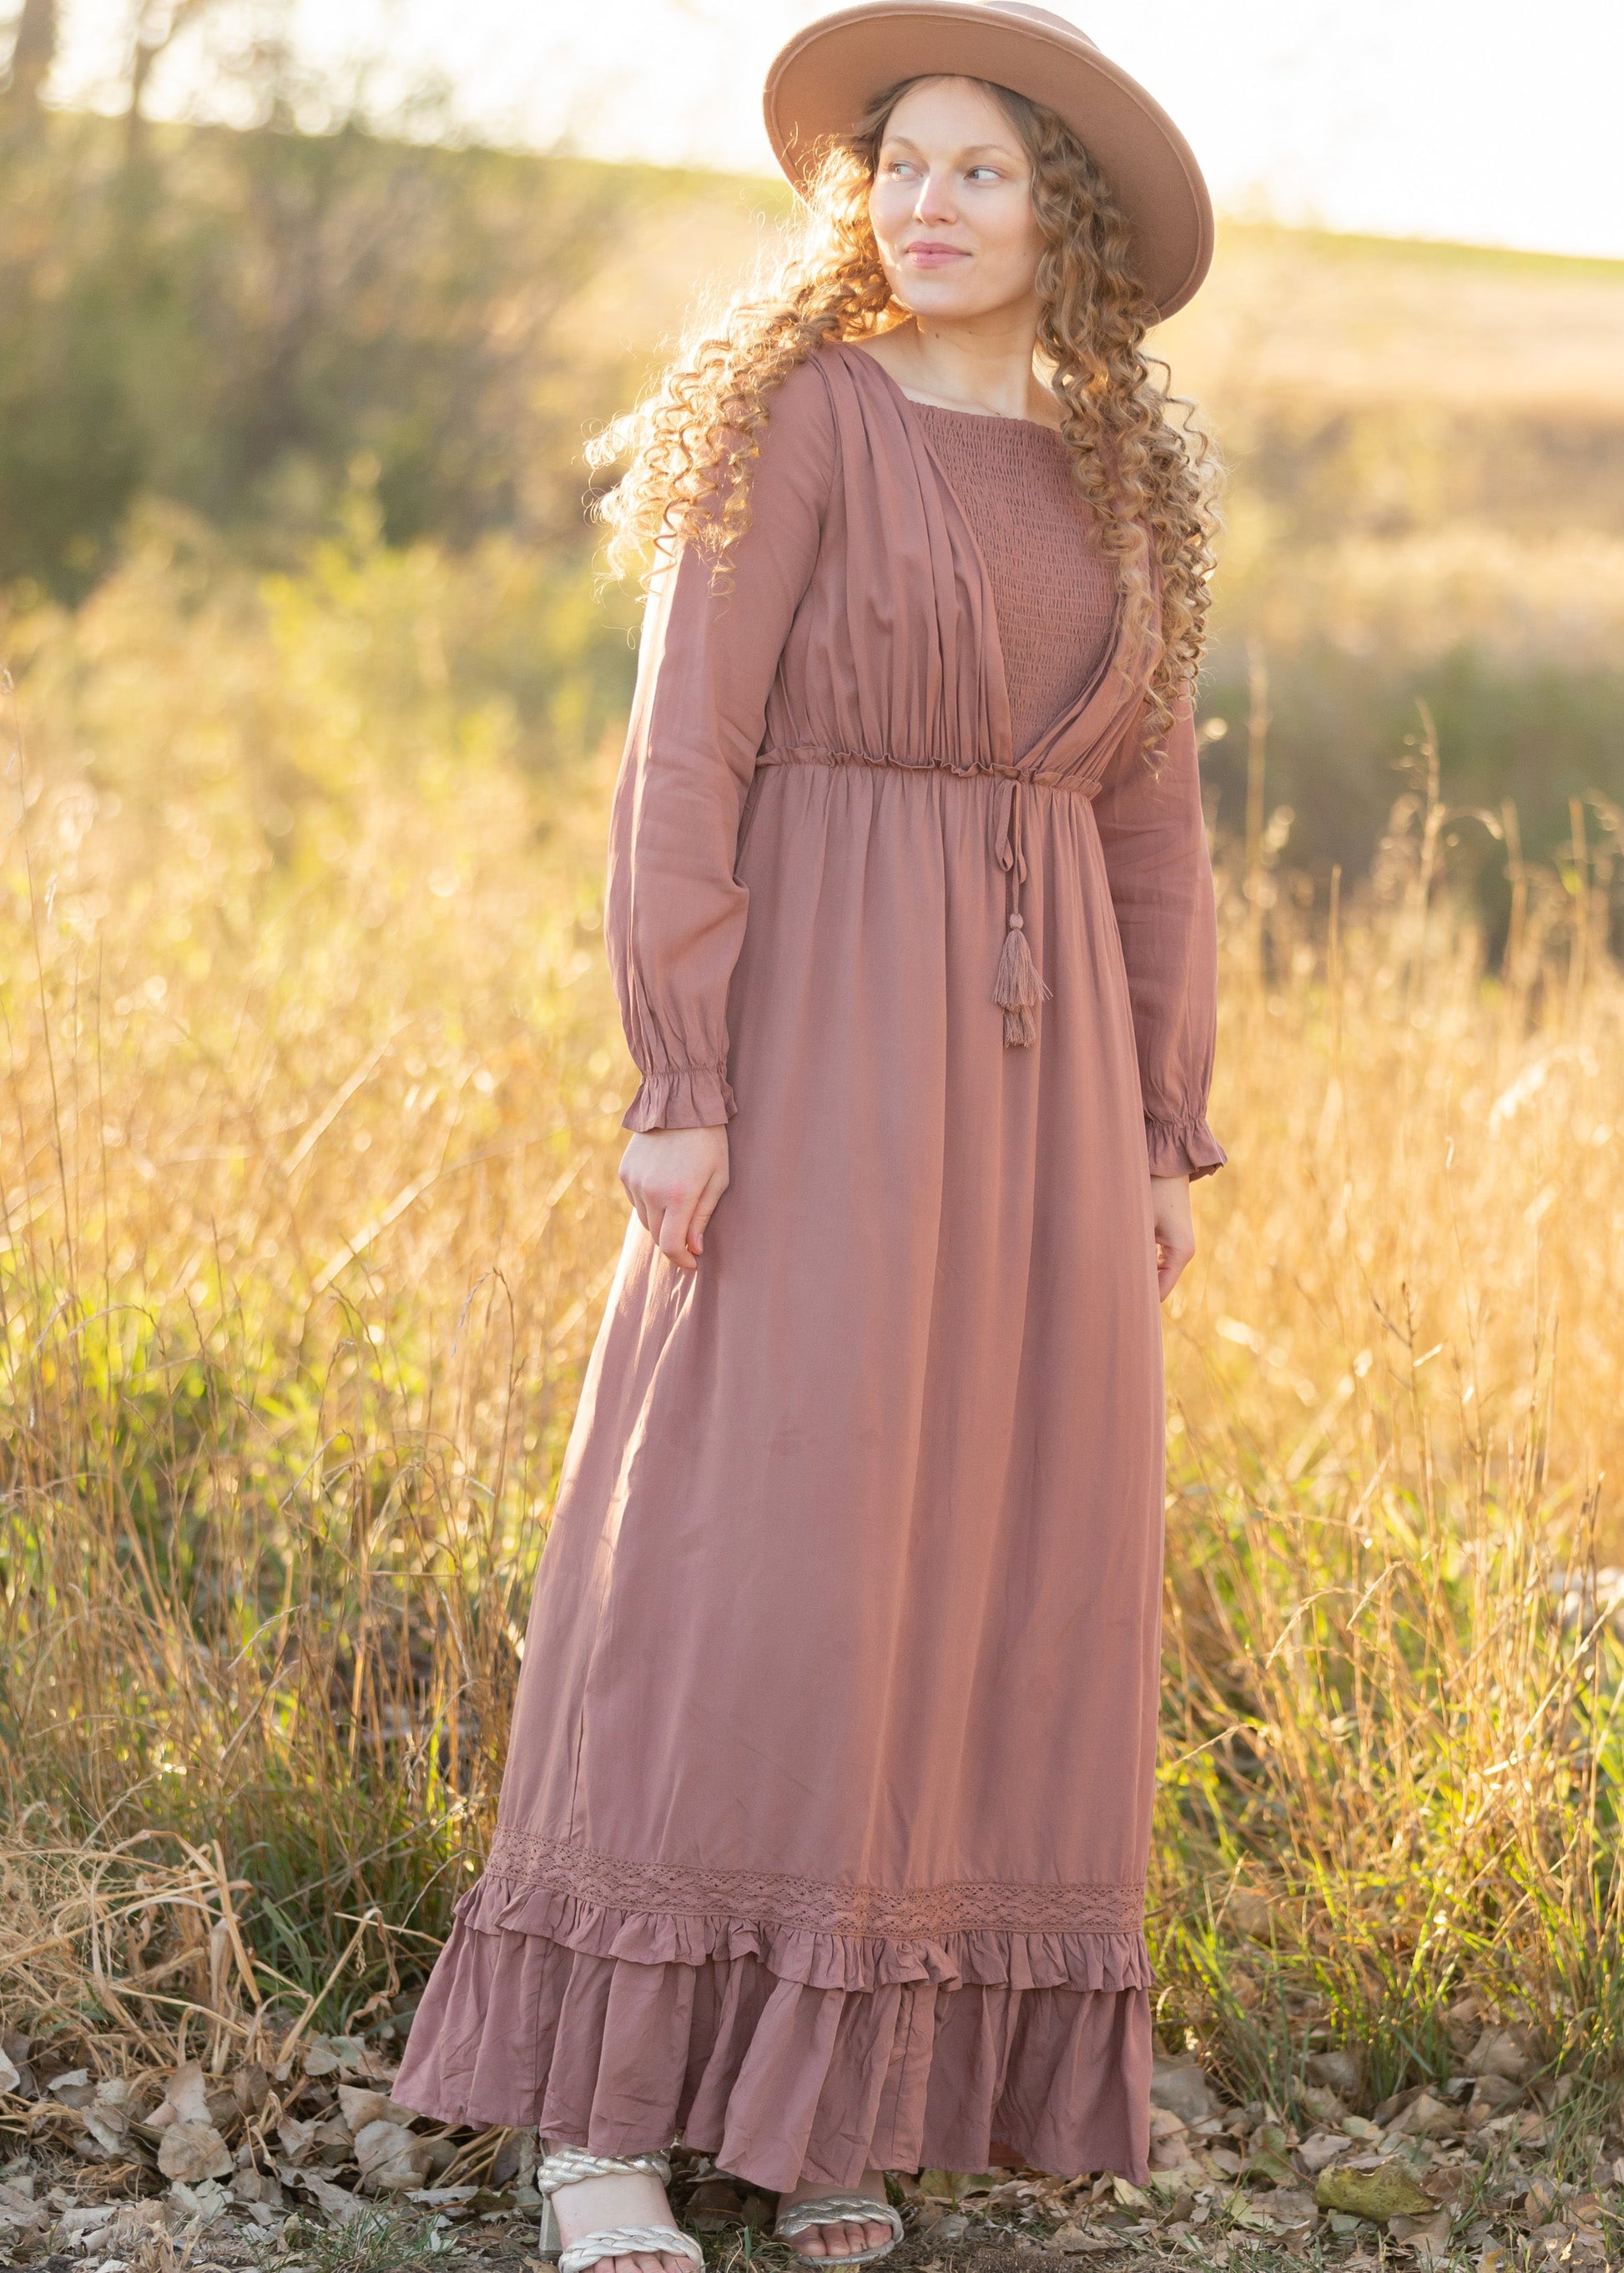 The Eve is an Inherit Design that is nursing friendly, has non functioning tie waist with tassels and is fully lined n a beautiful dusty mauve color. It is long sleeves and is a true maxi dress.